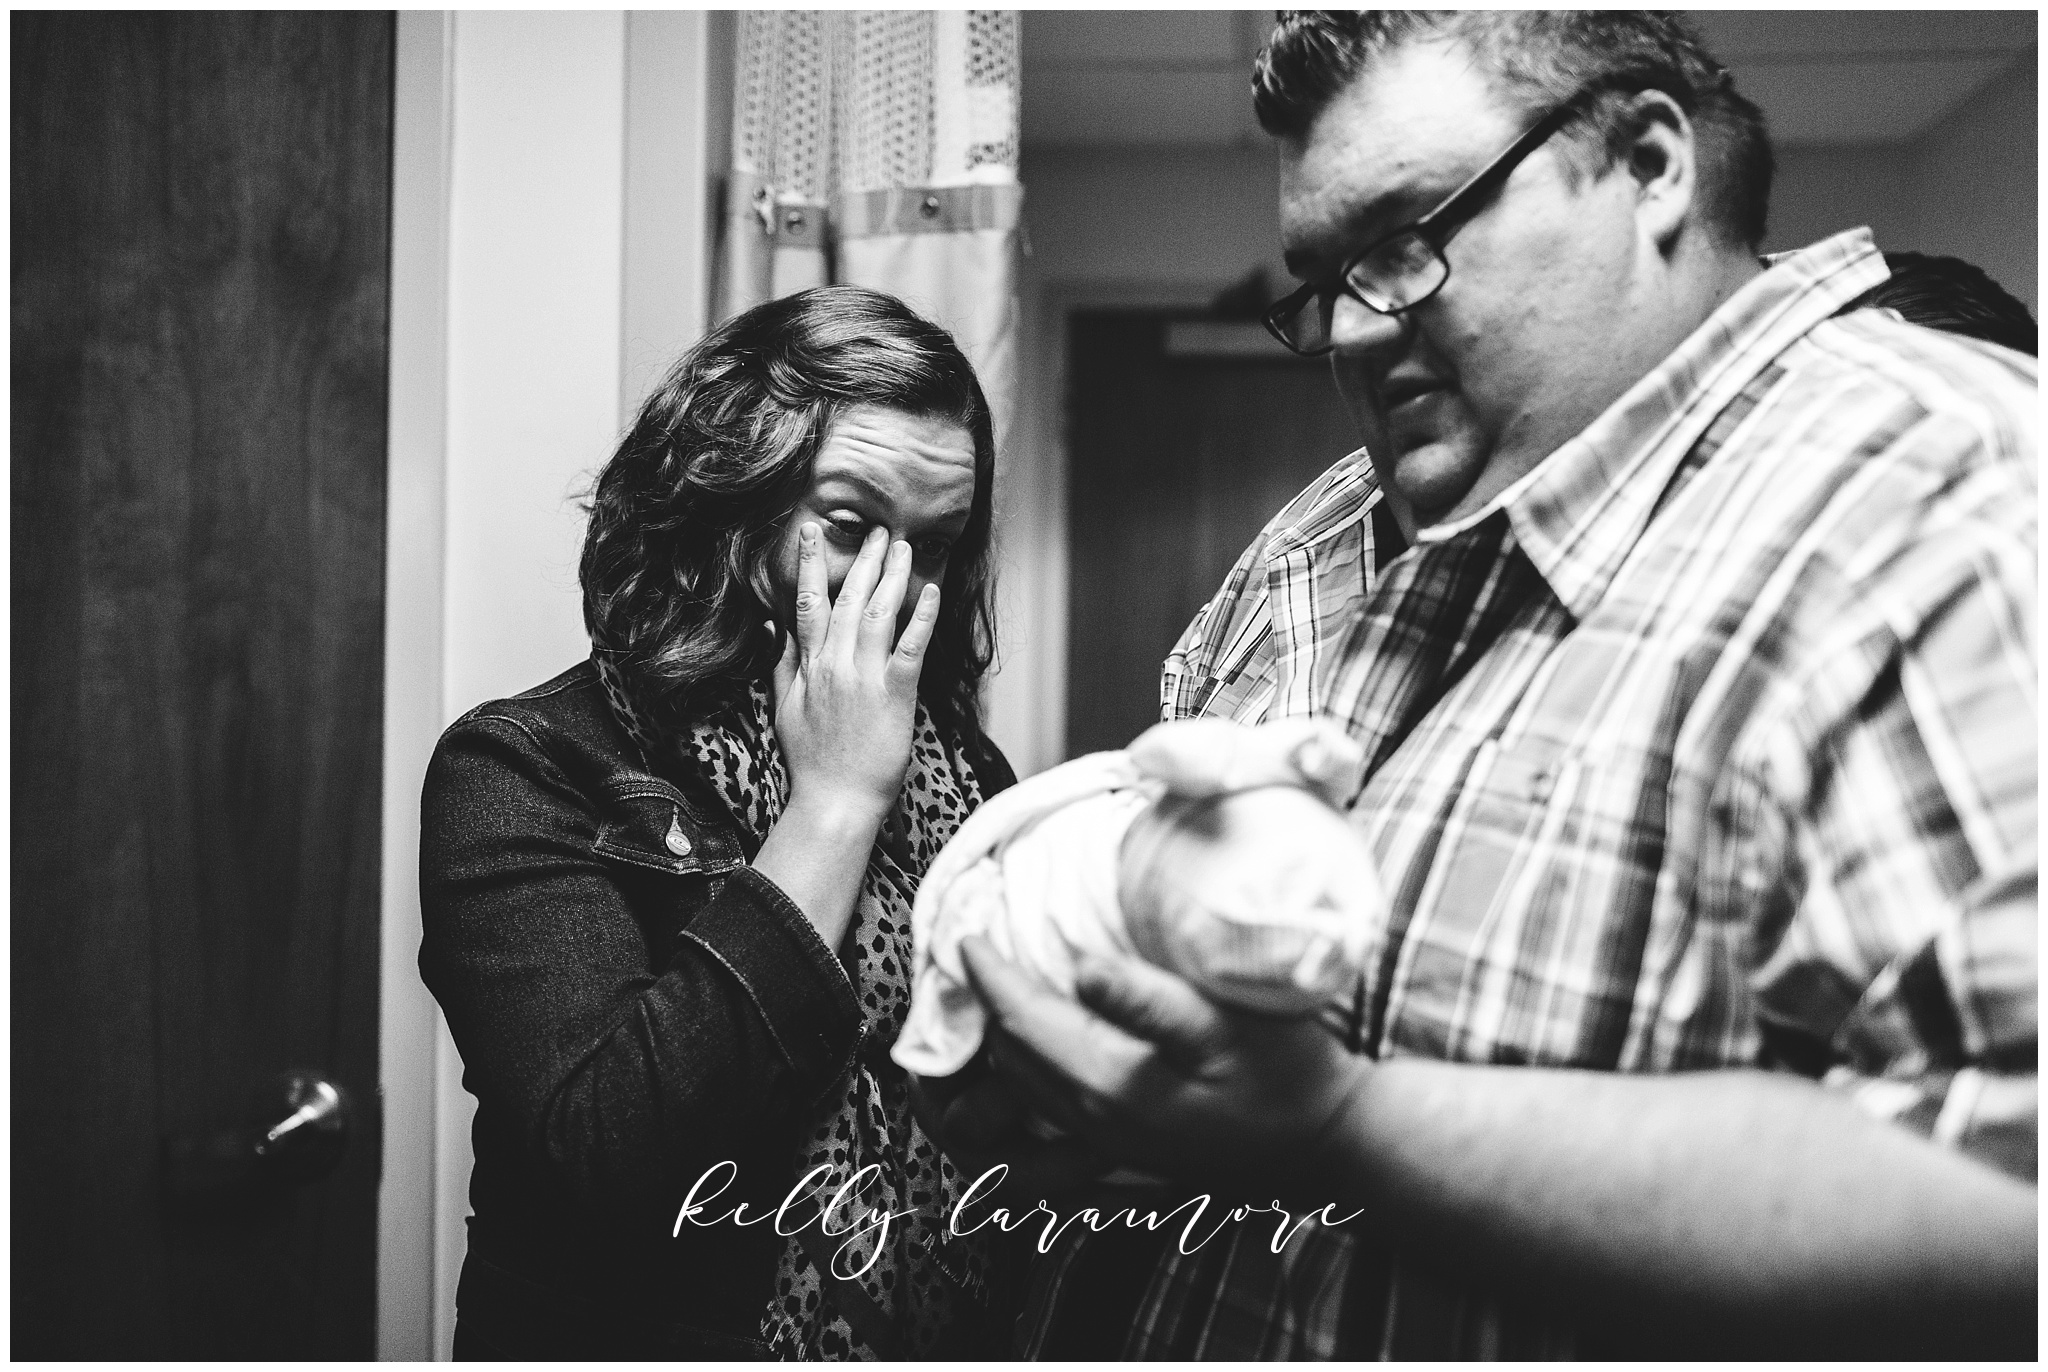 st louis birth story photographer, st louis family photographer, missouri baptist birth center birth, delivery room, crying relatives